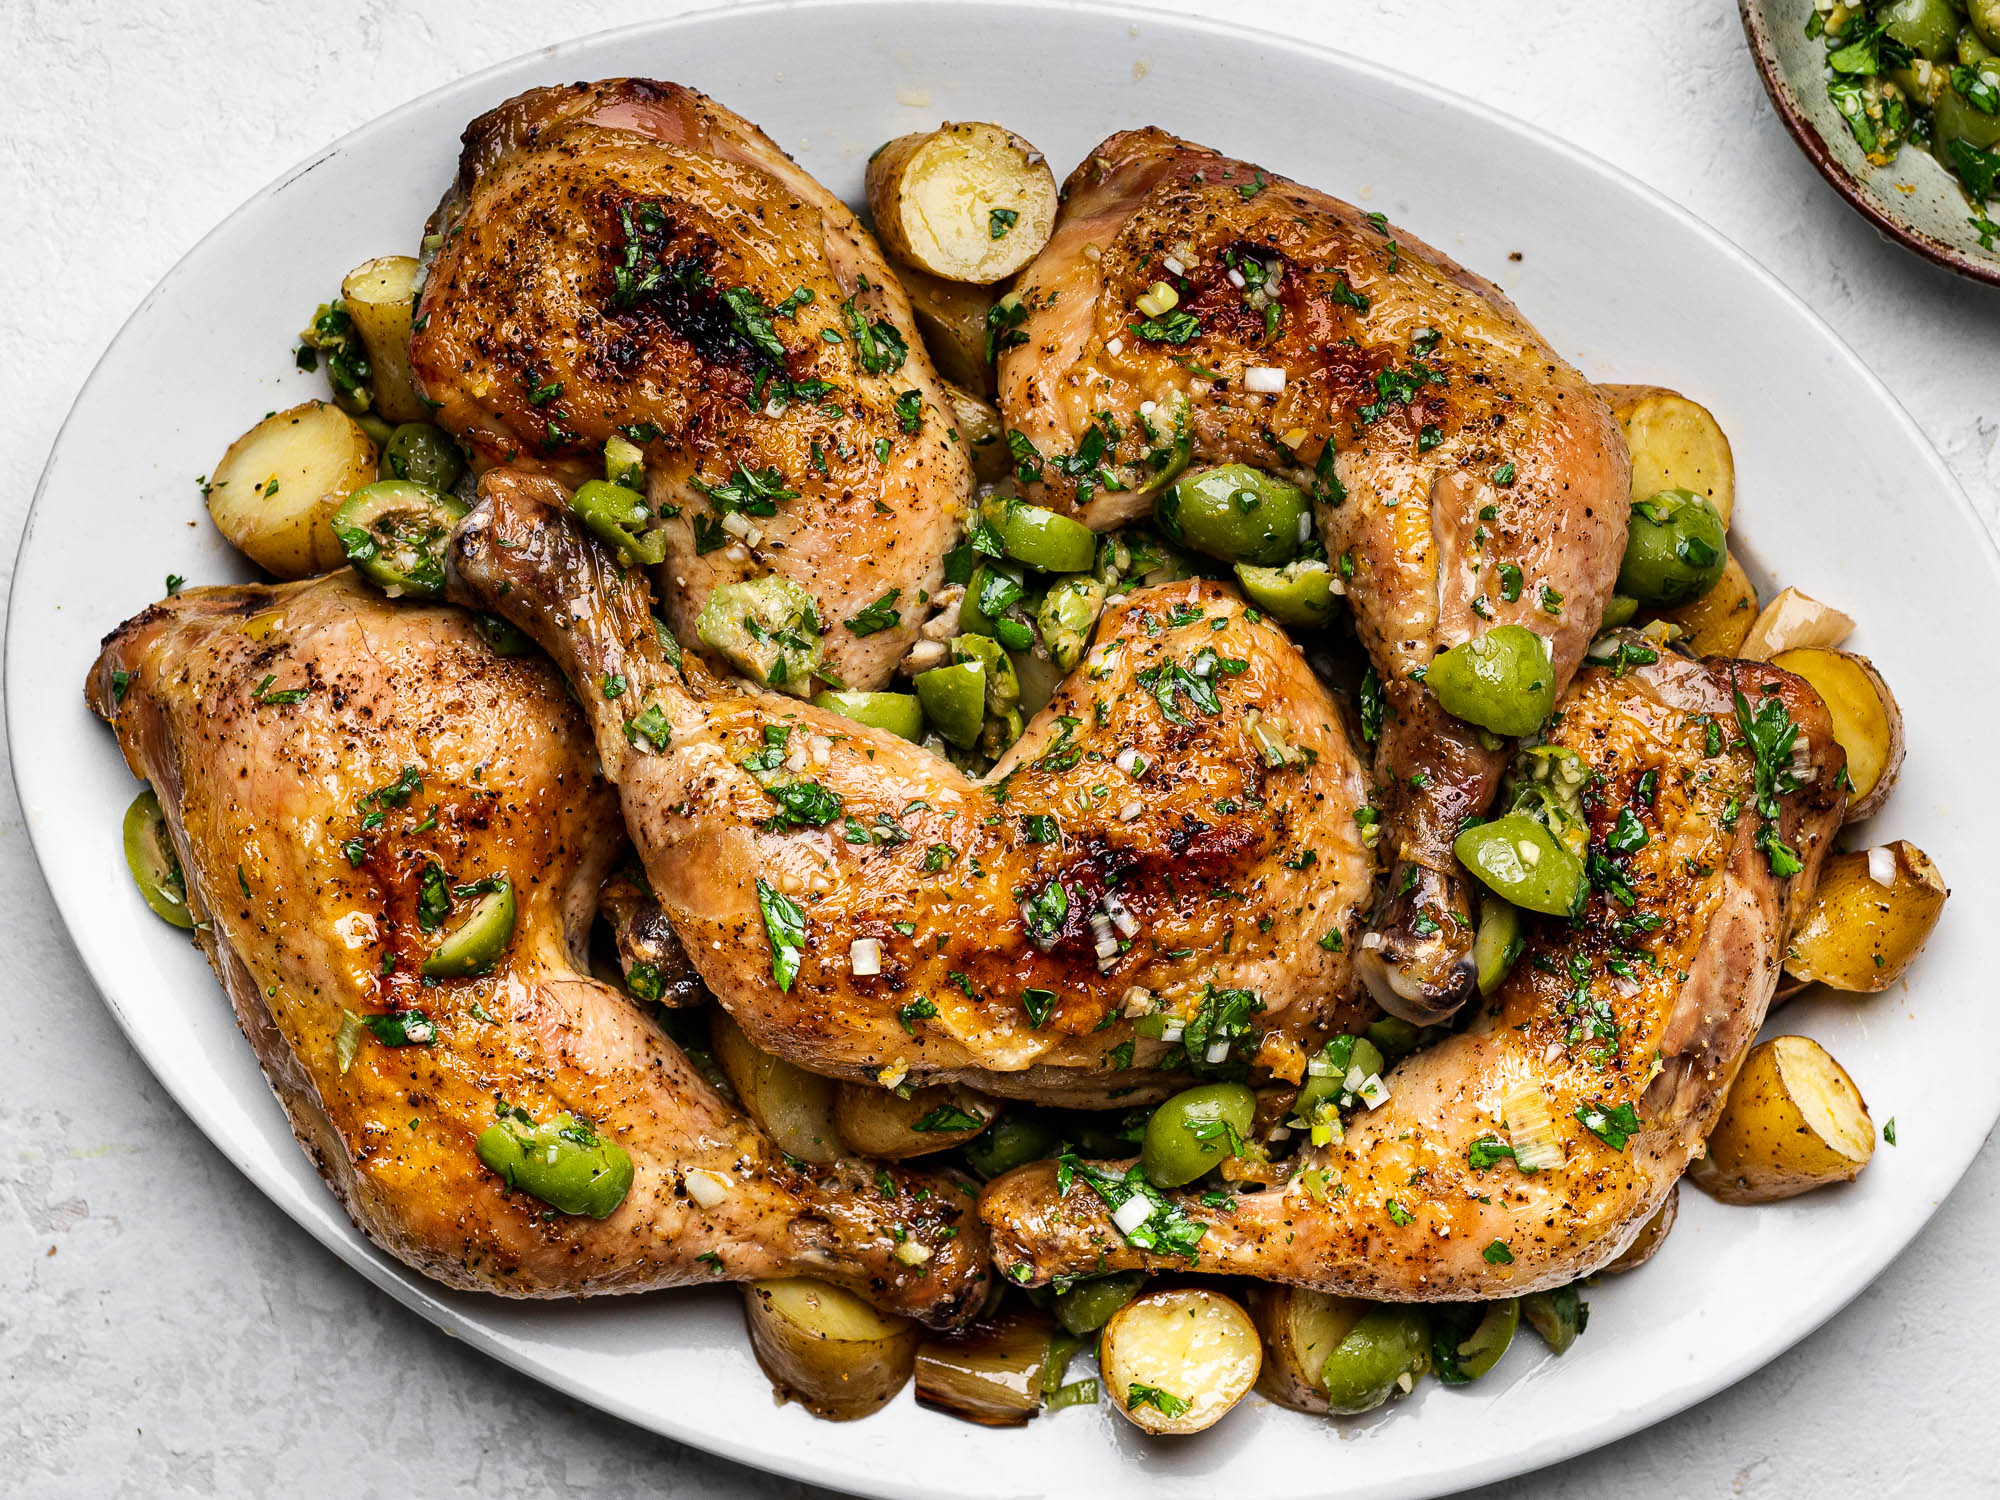 Chicken legs, leeks, and potatoes on a platter topped with green olive salsa